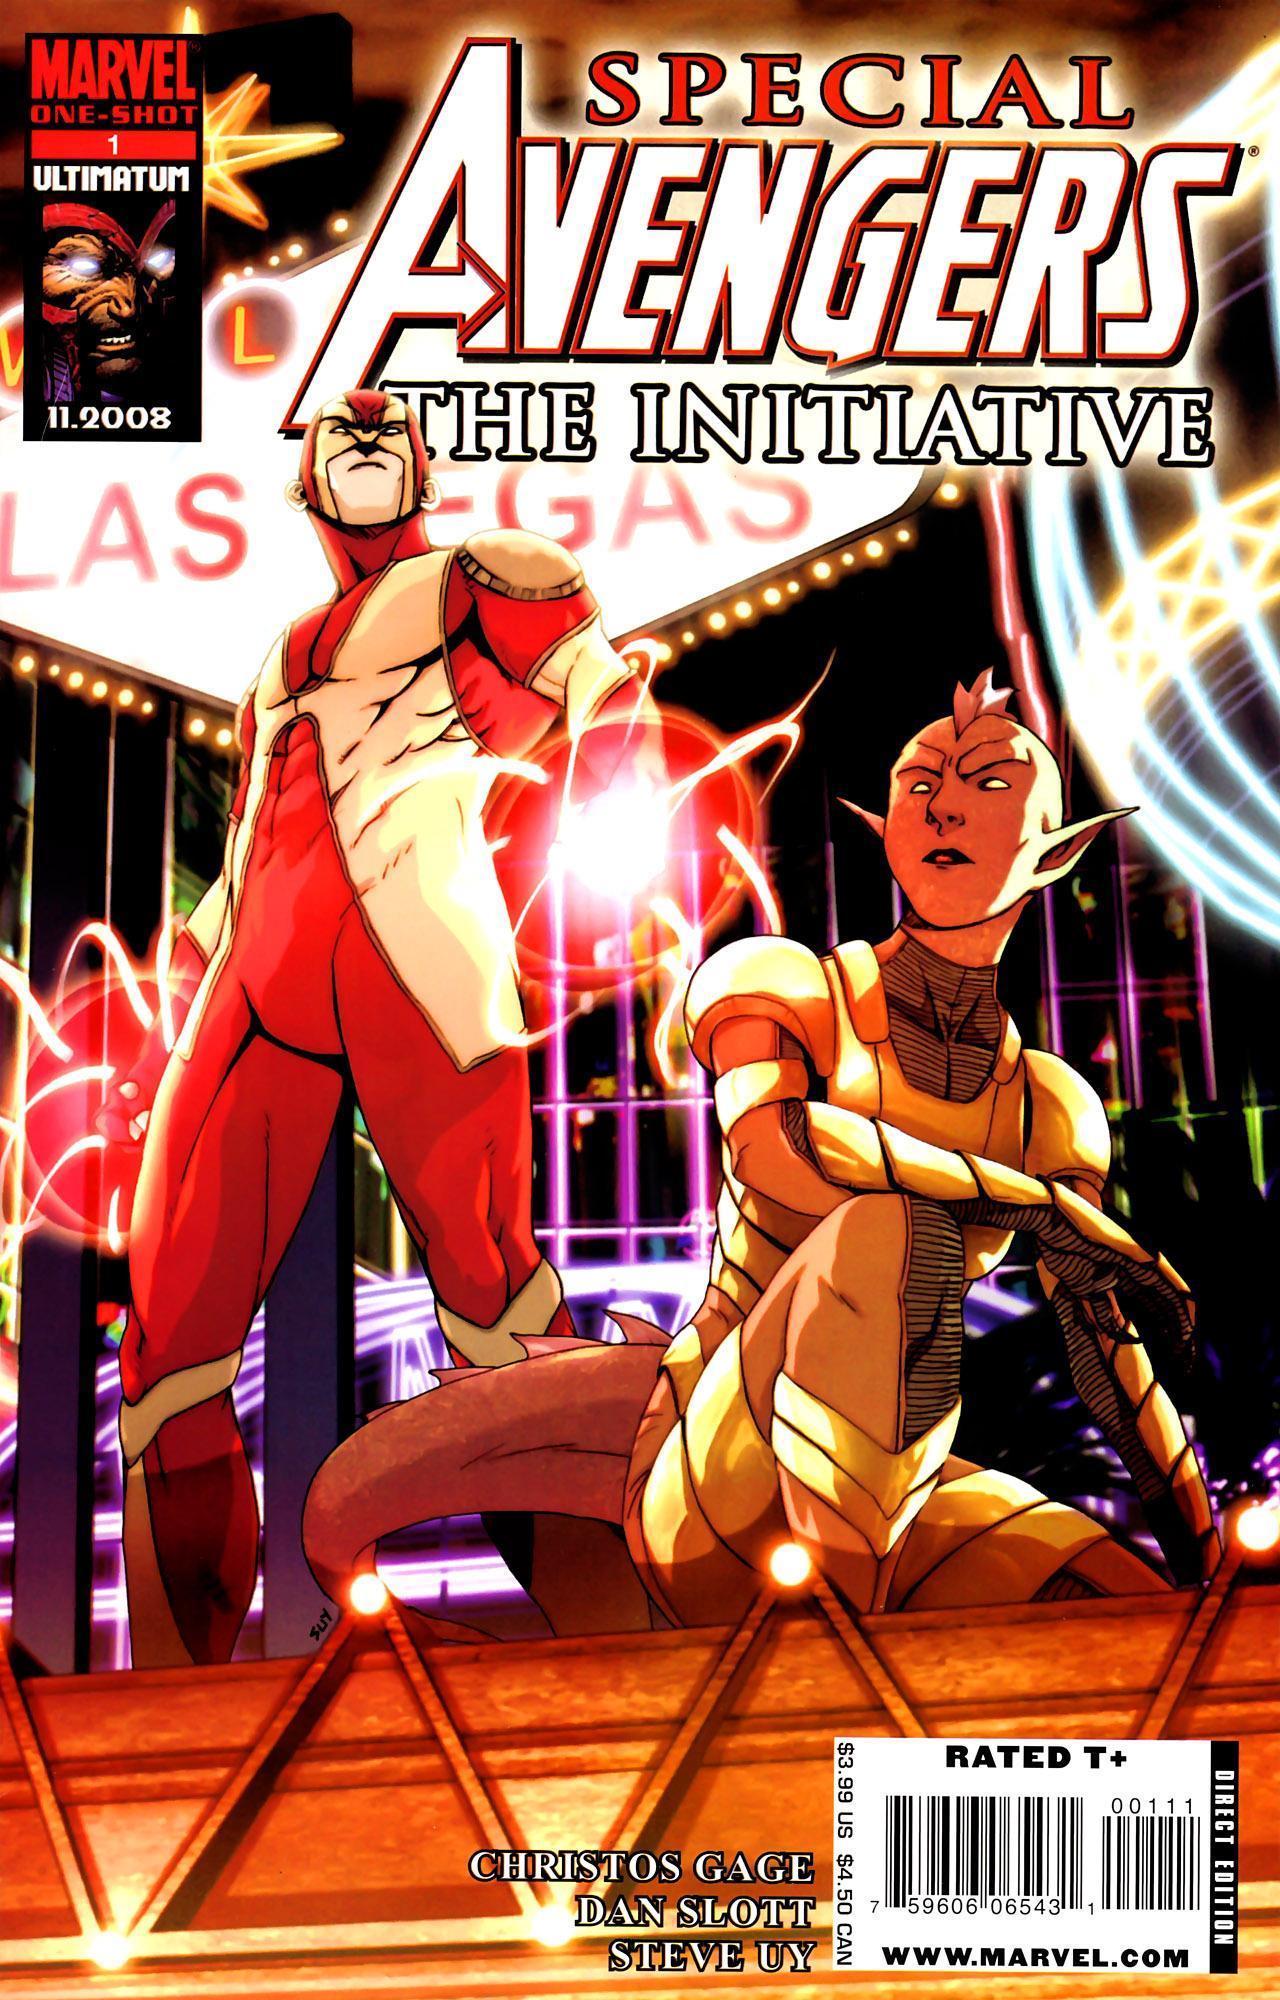 Avengers: The Initiative Special Vol. 1 #1